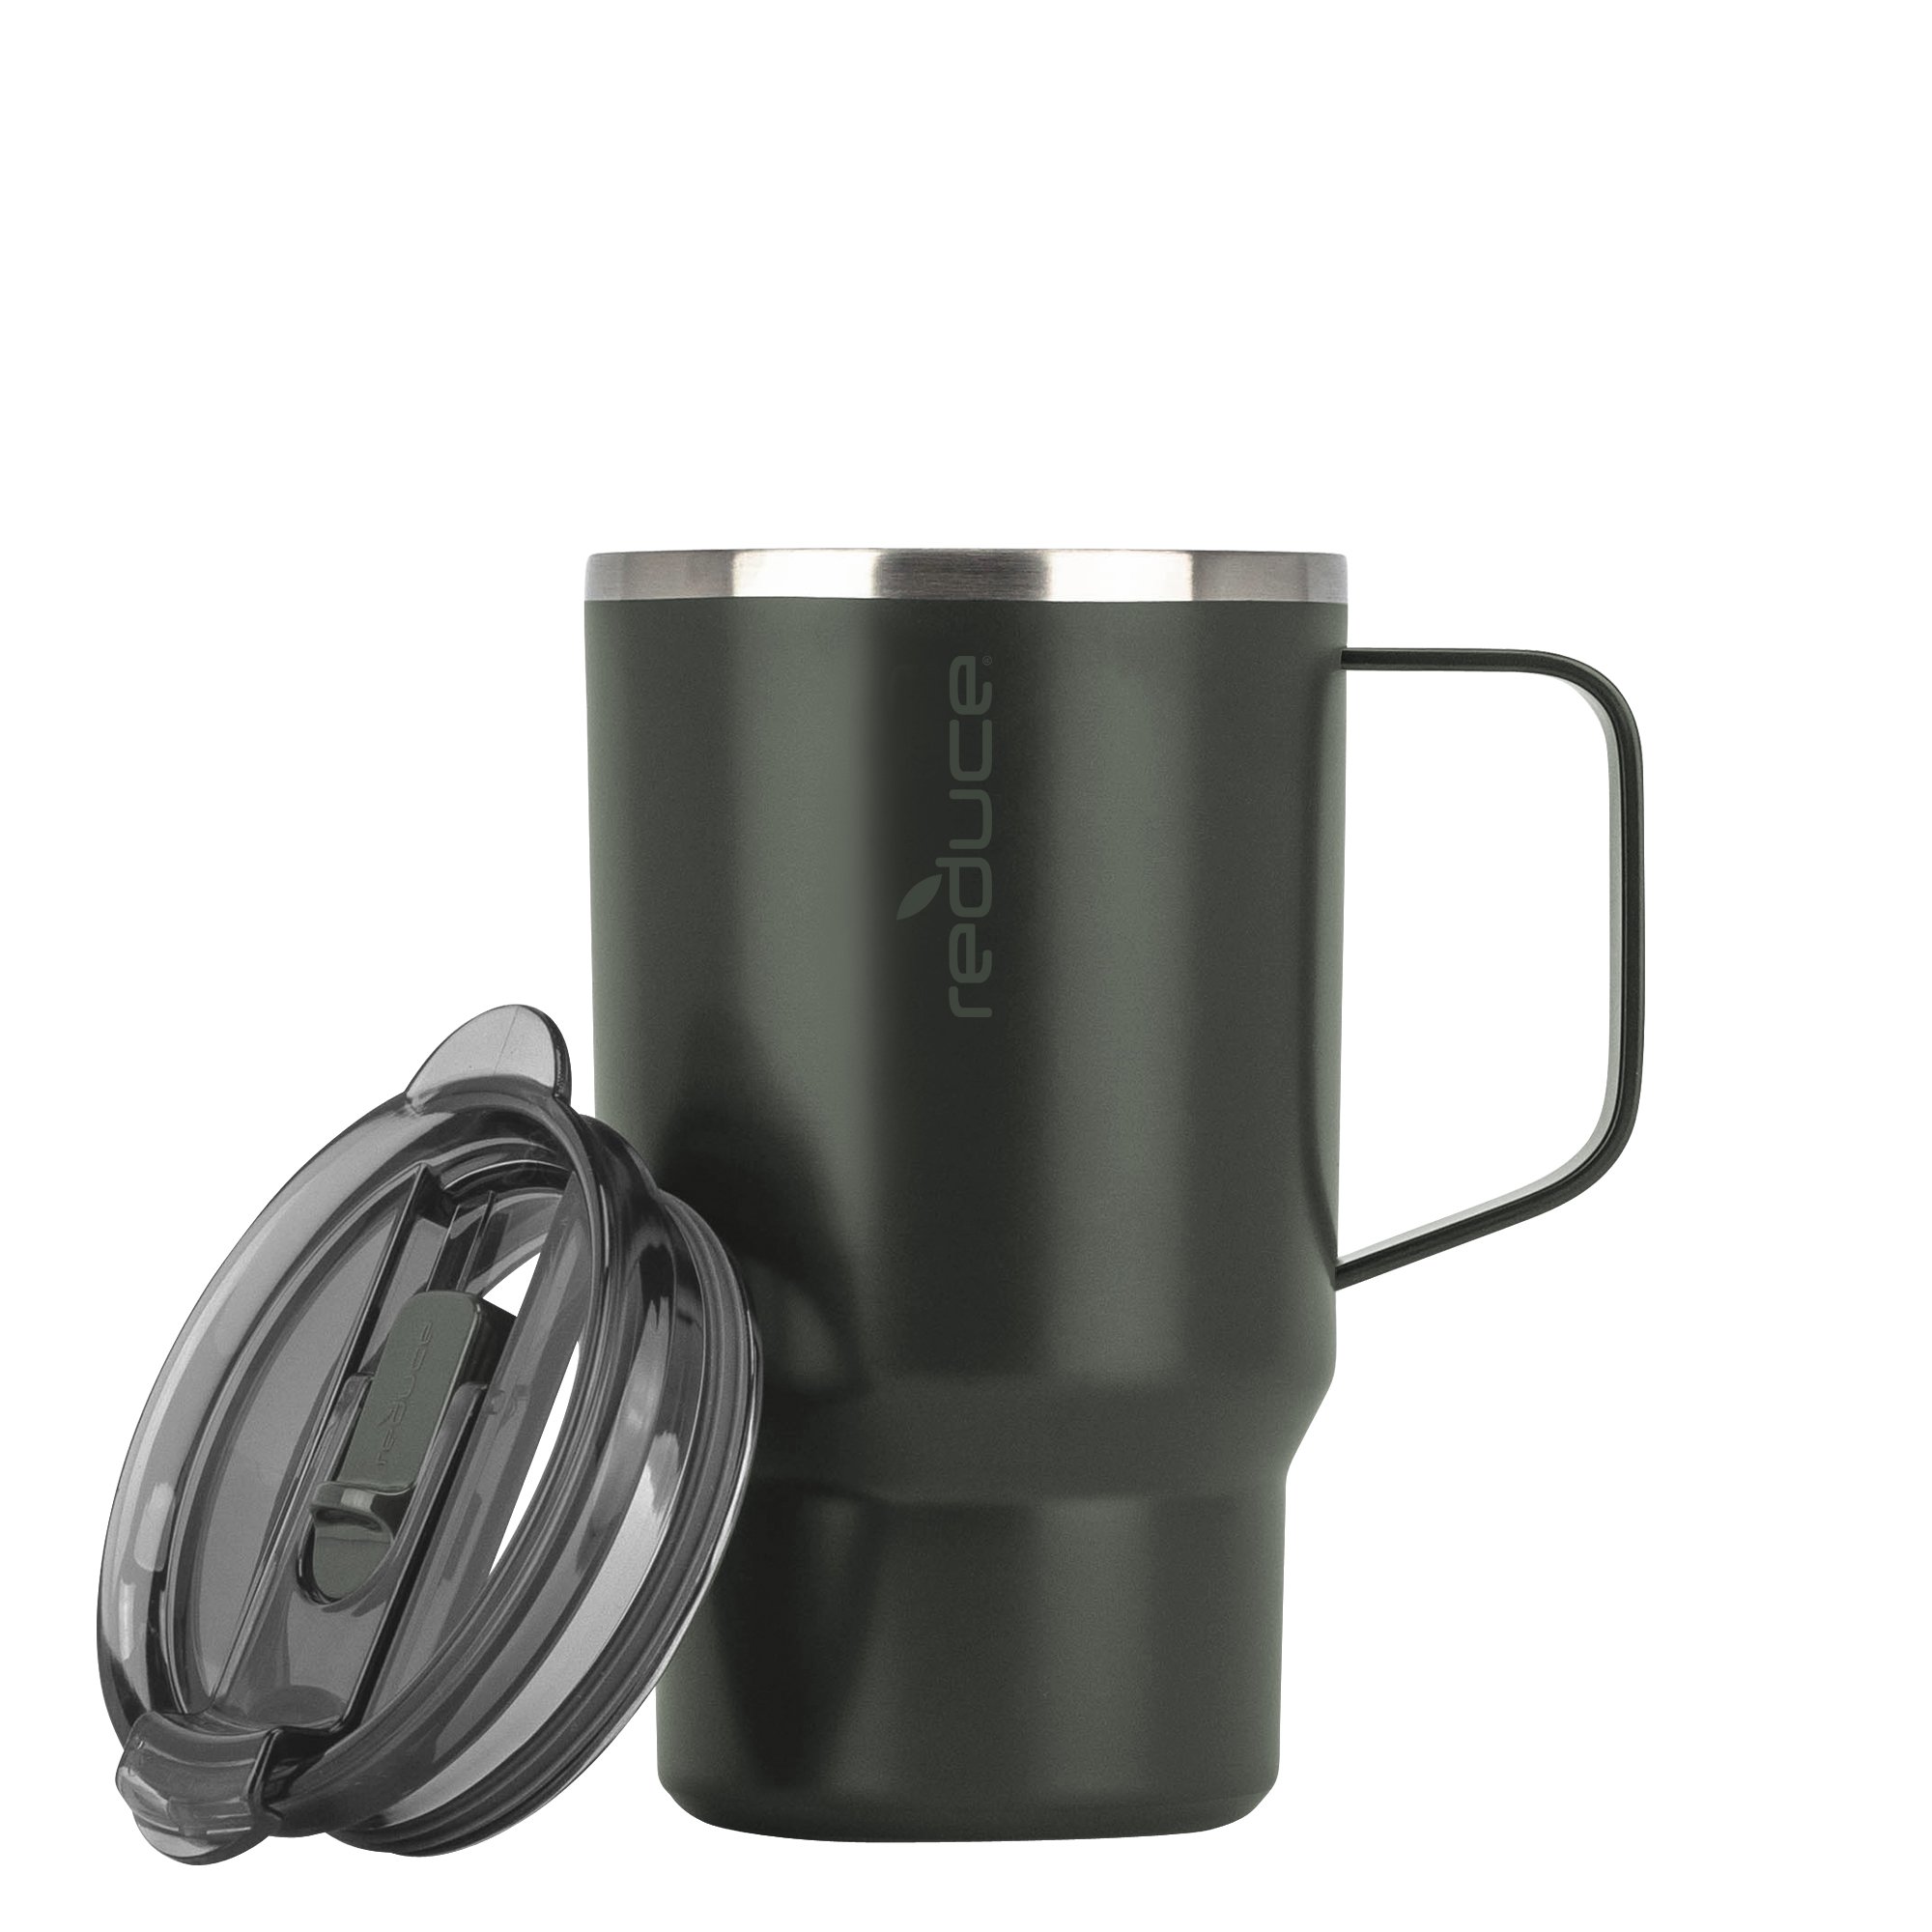 Smart Stainless Steel Heated Travel Mug 300ML, Temperature Control Hea –  EASEHOLD